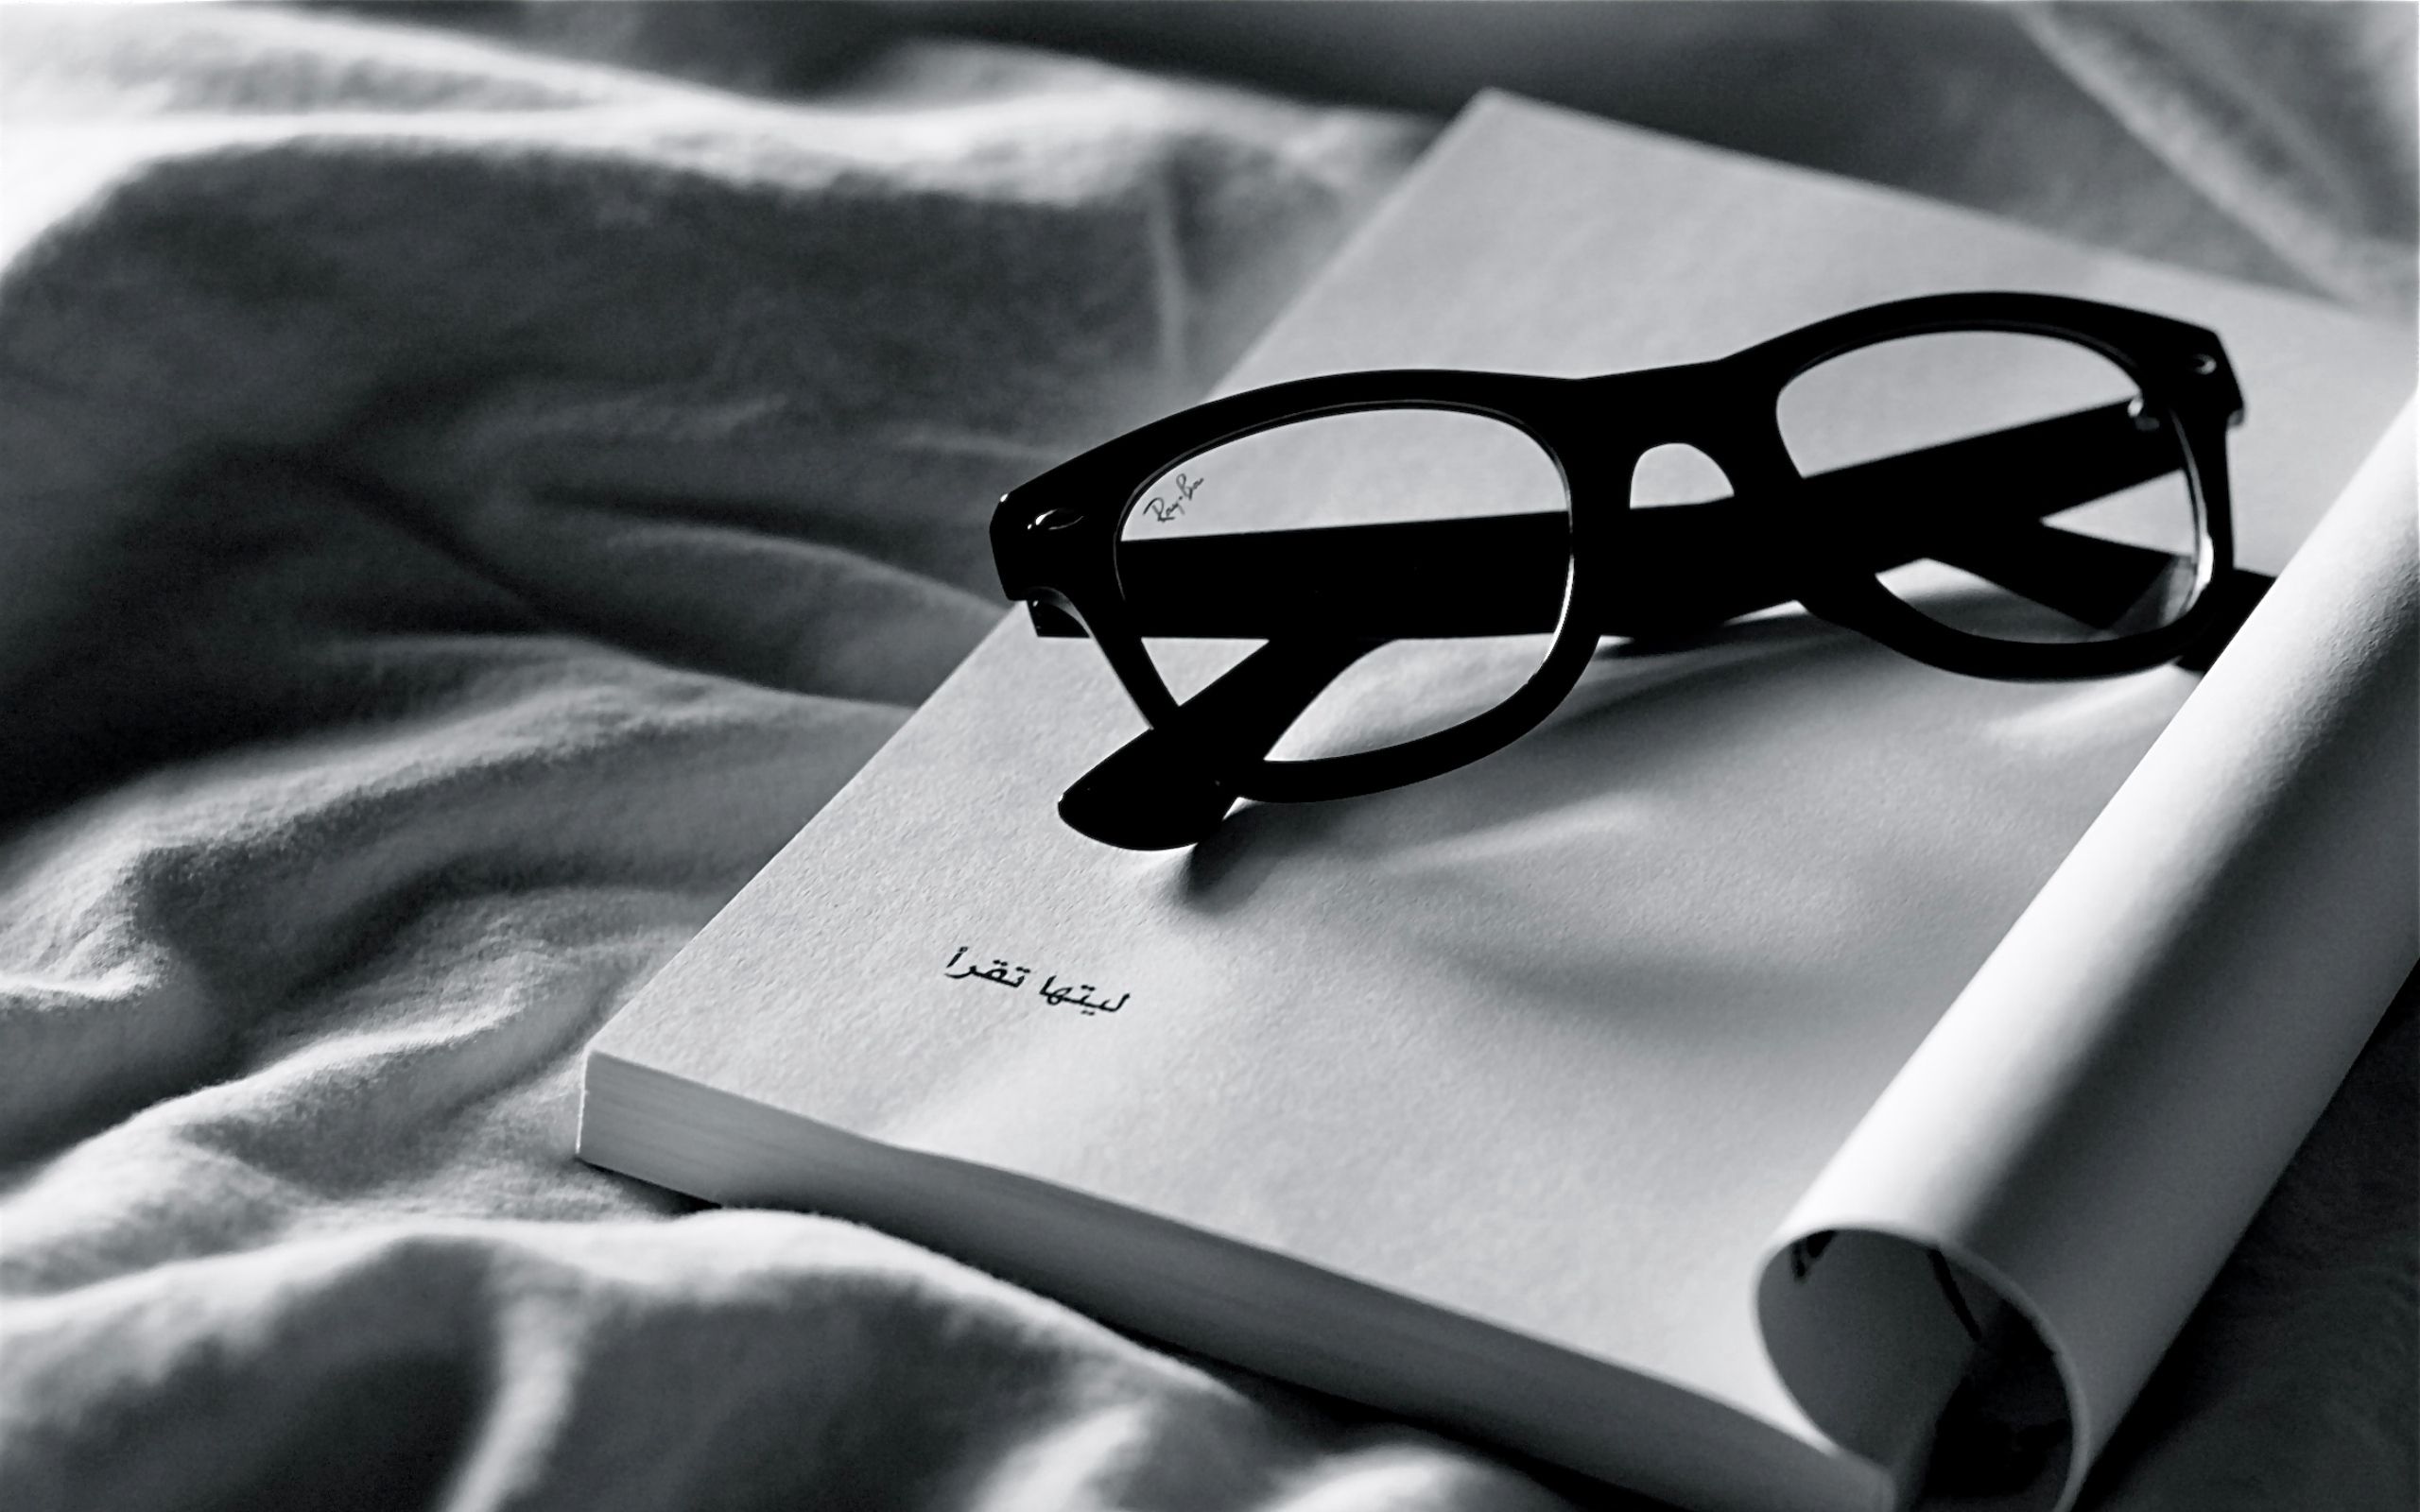 chb, bw, miscellanea, spectacles, miscellaneous, cloth, notebook, glasses Full HD